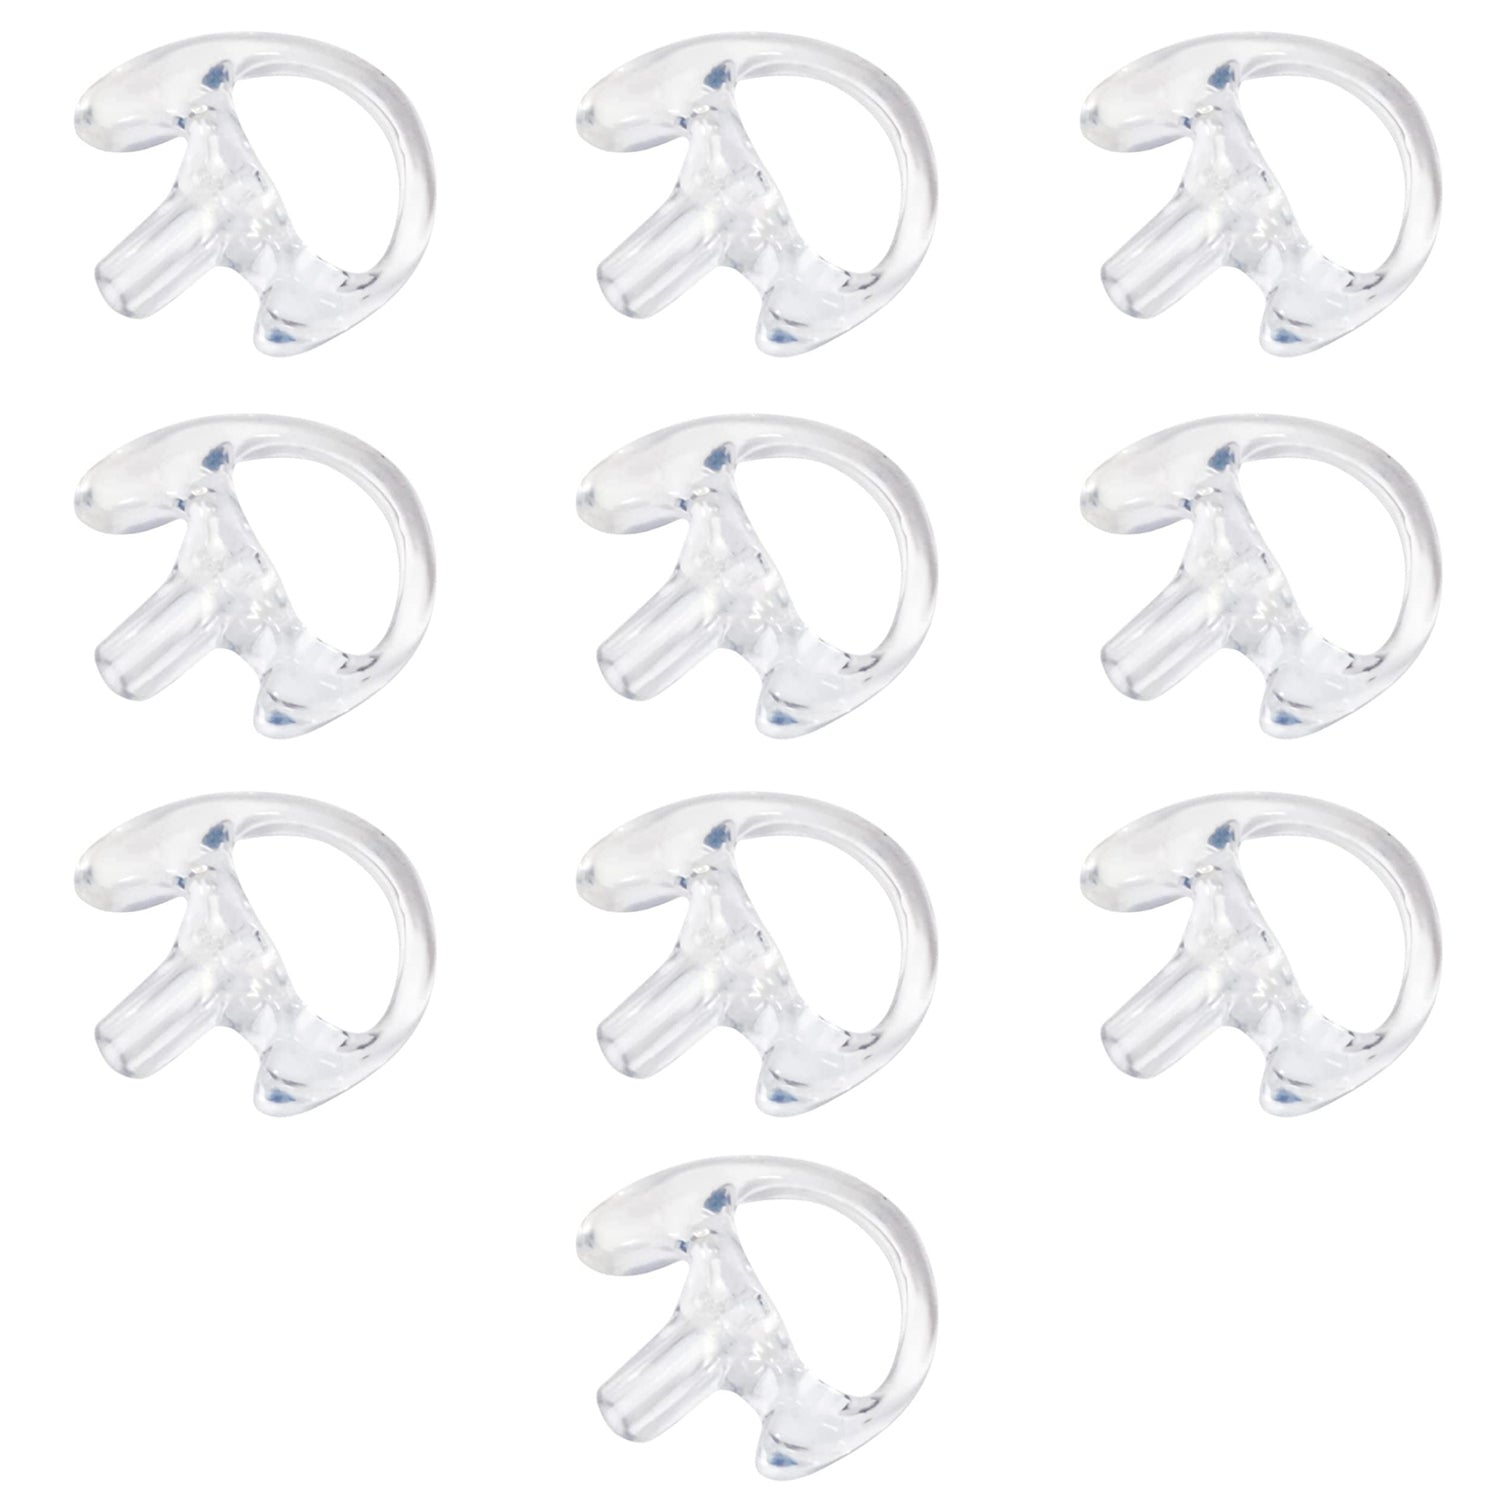 Clear RIGHT Medium Replacement Earmold Earbud for Two-Way Radios